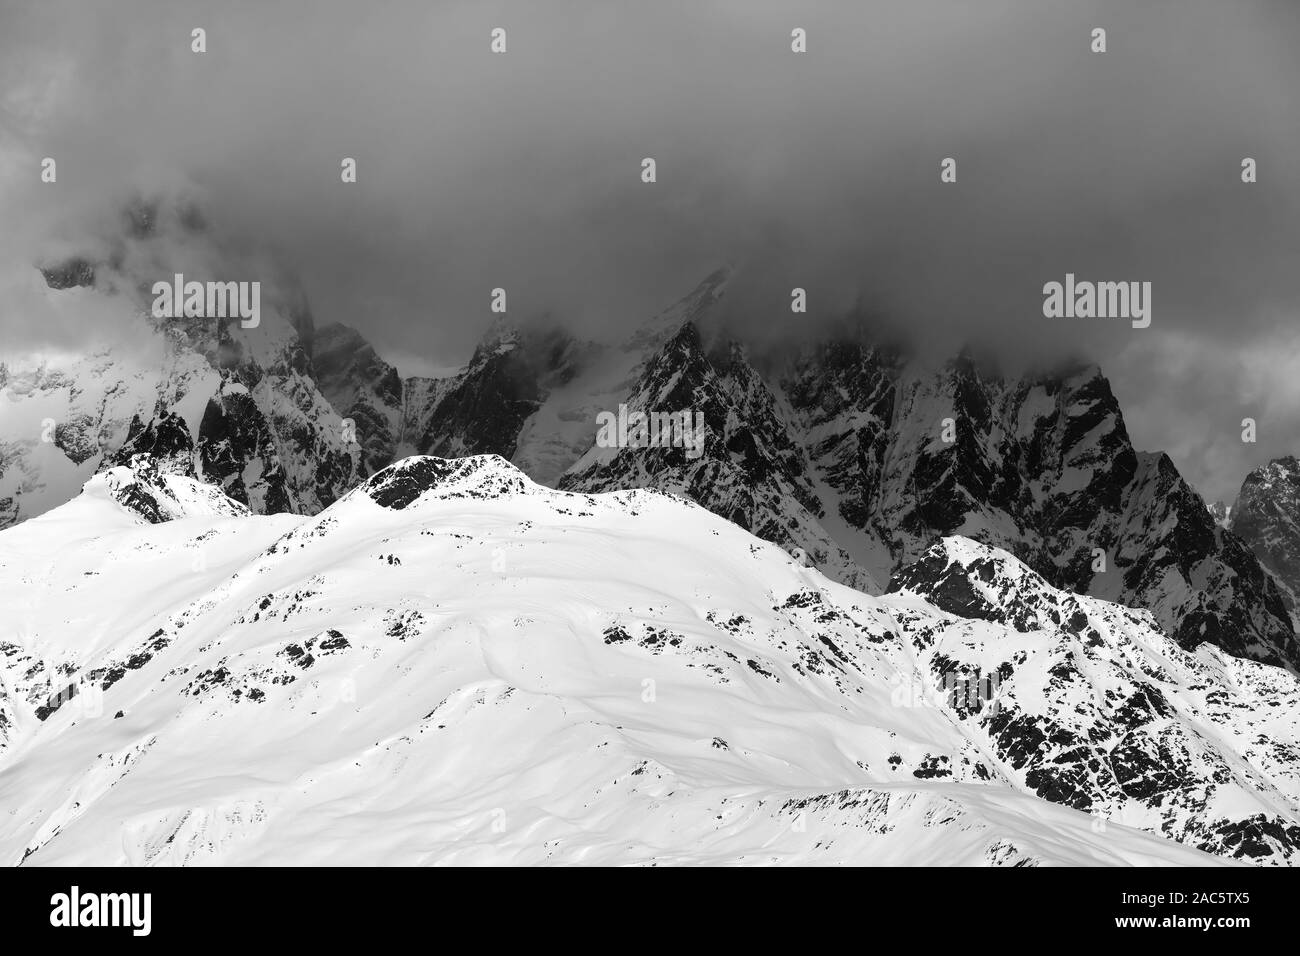 Snowy rocks in haze and storm clouds before blizzard at winter. Caucasus Mountains. Svaneti region of Georgia. Black and white toned landscape. Stock Photo